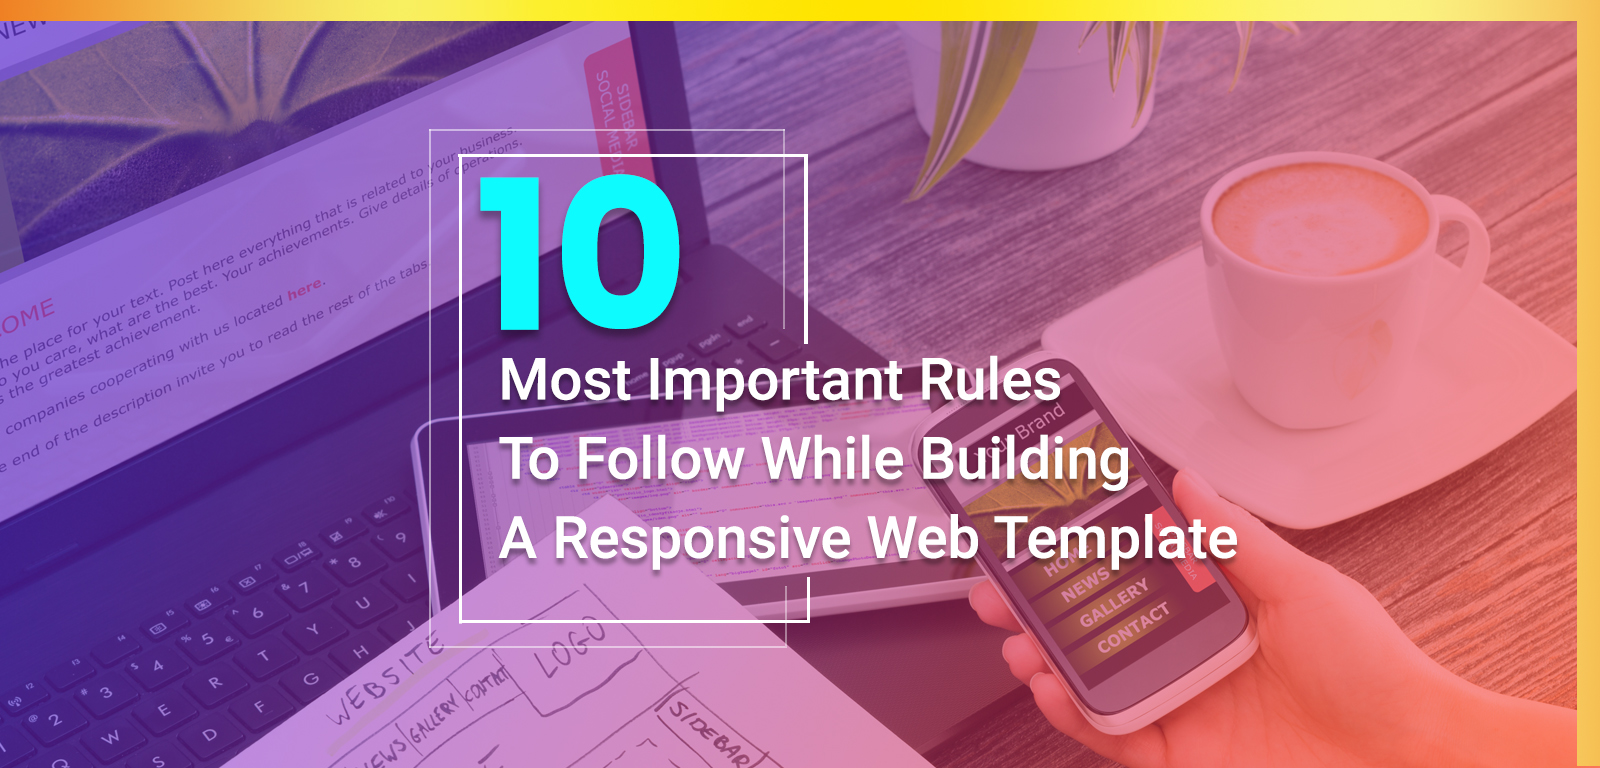 10 Most important rules to follow while building a Responsive Web Template